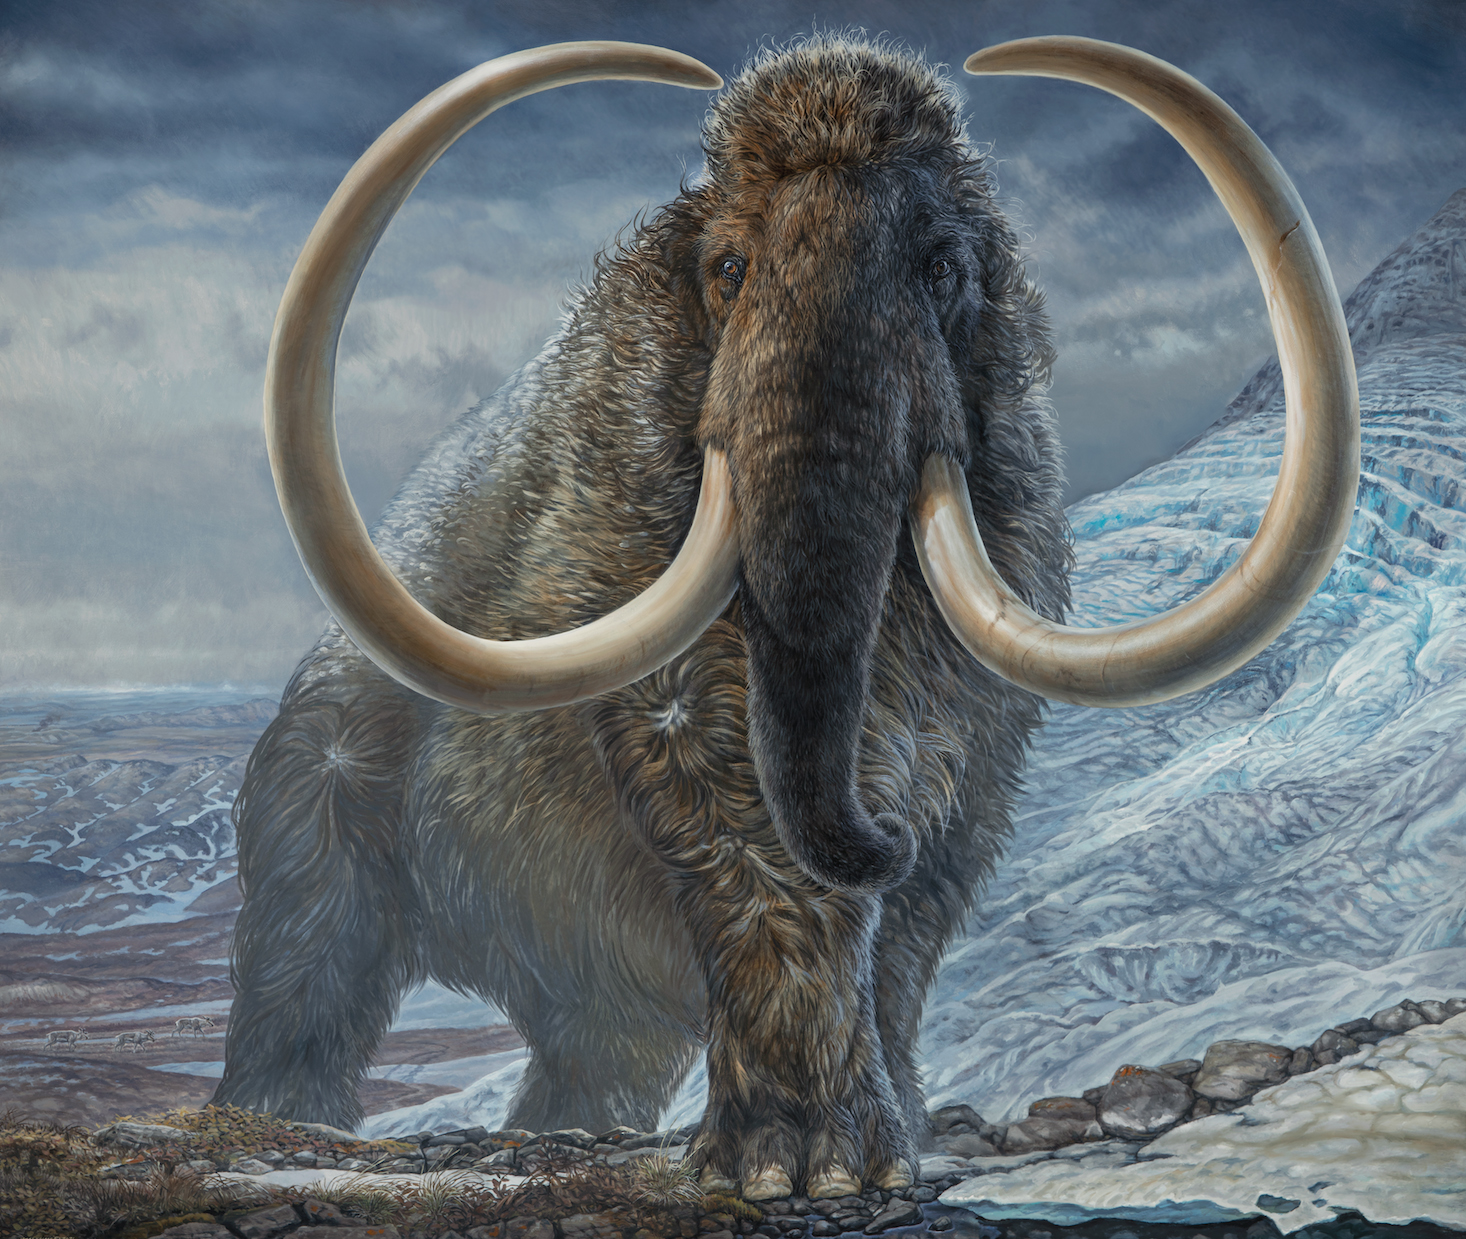 Image of a mammoth produced from an original life-size painting by paleo artist James Havens.